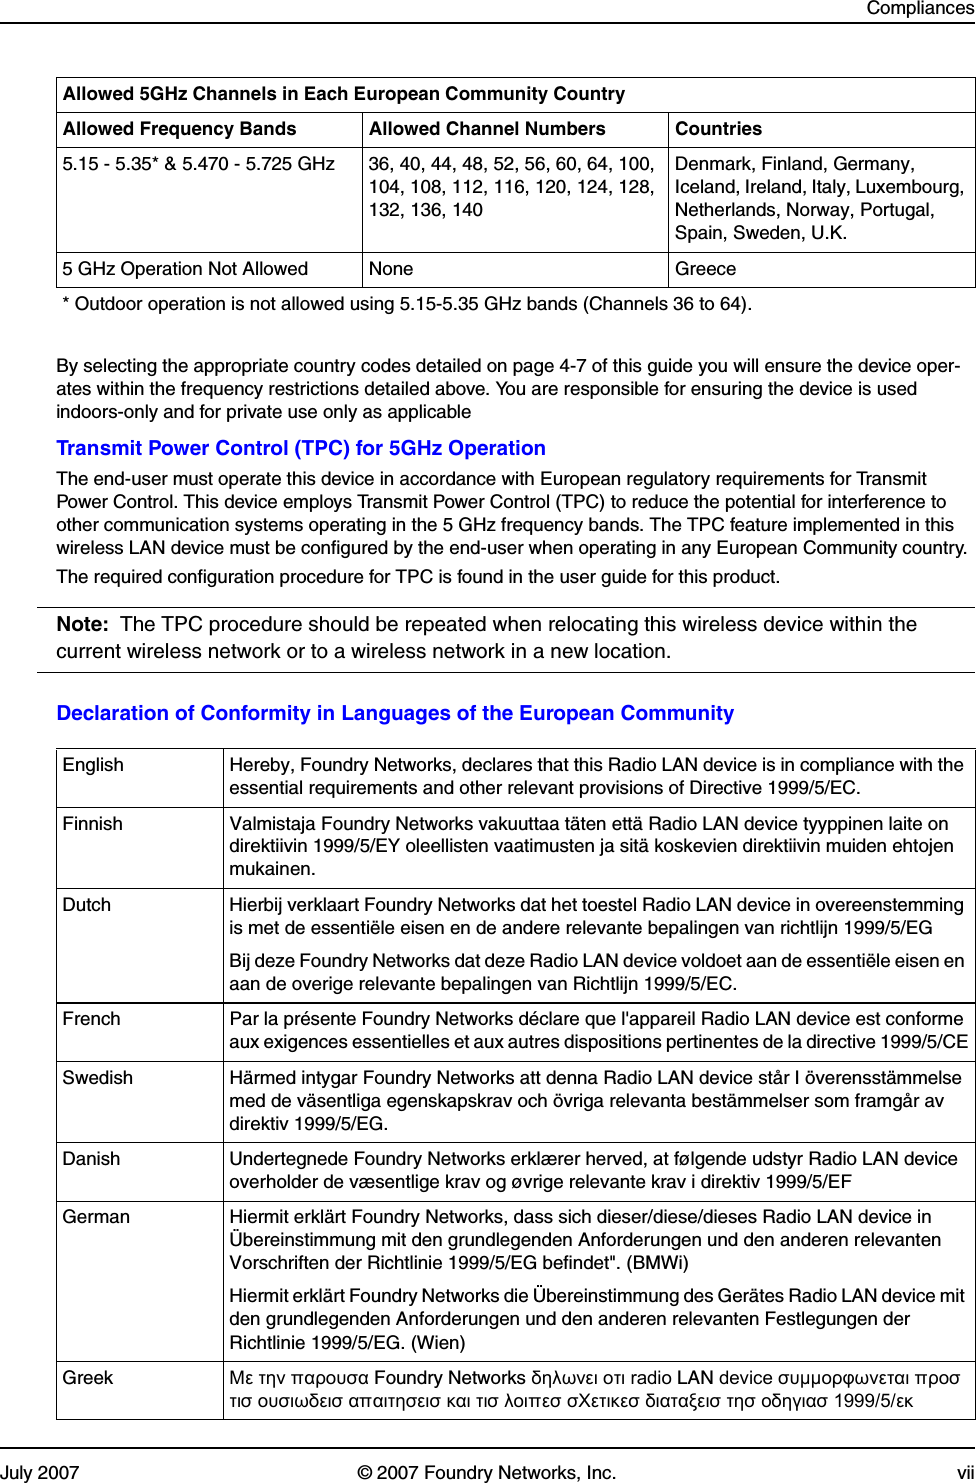 CompliancesJuly 2007 © 2007 Foundry Networks, Inc. viiBy selecting the appropriate country codes detailed on page 4-7 of this guide you will ensure the device oper-ates within the frequency restrictions detailed above. You are responsible for ensuring the device is used indoors-only and for private use only as applicableTransmit Power Control (TPC) for 5GHz OperationThe end-user must operate this device in accordance with European regulatory requirements for Transmit Power Control. This device employs Transmit Power Control (TPC) to reduce the potential for interference to other communication systems operating in the 5 GHz frequency bands. The TPC feature implemented in this wireless LAN device must be configured by the end-user when operating in any European Community country. The required configuration procedure for TPC is found in the user guide for this product.Note: The TPC procedure should be repeated when relocating this wireless device within the current wireless network or to a wireless network in a new location.Declaration of Conformity in Languages of the European Community5.15 - 5.35* &amp; 5.470 - 5.725 GHz 36, 40, 44, 48, 52, 56, 60, 64, 100, 104, 108, 112, 116, 120, 124, 128, 132, 136, 140Denmark, Finland, Germany, Iceland, Ireland, Italy, Luxembourg, Netherlands, Norway, Portugal, Spain, Sweden, U.K.5 GHz Operation Not Allowed None Greece* Outdoor operation is not allowed using 5.15-5.35 GHz bands (Channels 36 to 64).English Hereby, Foundry Networks, declares that this Radio LAN device is in compliance with the essential requirements and other relevant provisions of Directive 1999/5/EC.Finnish Valmistaja Foundry Networks vakuuttaa täten että Radio LAN device tyyppinen laite on direktiivin 1999/5/EY oleellisten vaatimusten ja sitä koskevien direktiivin muiden ehtojen mukainen.Dutch Hierbij verklaart Foundry Networks dat het toestel Radio LAN device in overeenstemming is met de essentiële eisen en de andere relevante bepalingen van richtlijn 1999/5/EGBij deze Foundry Networks dat deze Radio LAN device voldoet aan de essentiële eisen en aan de overige relevante bepalingen van Richtlijn 1999/5/EC.French Par la présente Foundry Networks déclare que l&apos;appareil Radio LAN device est conforme aux exigences essentielles et aux autres dispositions pertinentes de la directive 1999/5/CESwedish Härmed intygar Foundry Networks att denna Radio LAN device står I överensstämmelse med de väsentliga egenskapskrav och övriga relevanta bestämmelser som framgår av direktiv 1999/5/EG.Danish Undertegnede Foundry Networks erklærer herved, at følgende udstyr Radio LAN device overholder de væsentlige krav og øvrige relevante krav i direktiv 1999/5/EFGerman Hiermit erklärt Foundry Networks, dass sich dieser/diese/dieses Radio LAN device in Übereinstimmung mit den grundlegenden Anforderungen und den anderen relevanten Vorschriften der Richtlinie 1999/5/EG befindet&quot;. (BMWi)Hiermit erklärt Foundry Networks die Übereinstimmung des Gerätes Radio LAN device mit den grundlegenden Anforderungen und den anderen relevanten Festlegungen der Richtlinie 1999/5/EG. (Wien)Greek Με την παρουσα Foundry Networks δηλωνει οτι radio LAN device συμμορφωνεται προσ τισ ουσιωδεισ απαιτησεισ και τισ λοιπεσ σΧετικεσ διαταξεισ τησ οδηγιασ 1999/5/εκAllowed 5GHz Channels in Each European Community CountryAllowed Frequency Bands Allowed Channel Numbers Countries